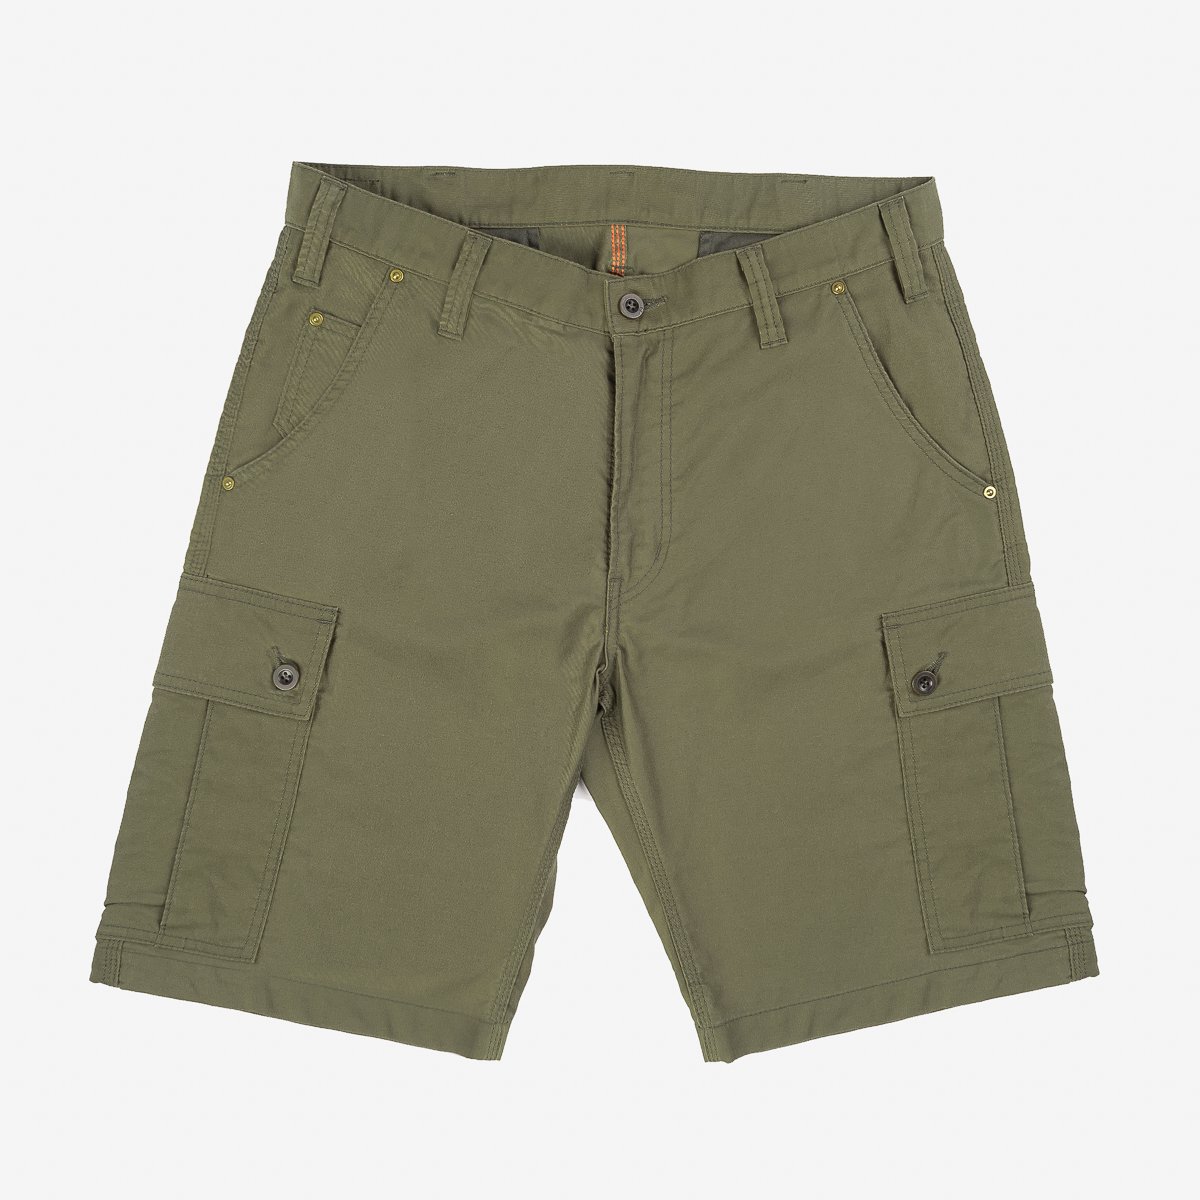 Cotton Whipcord Camp Shorts - Olive